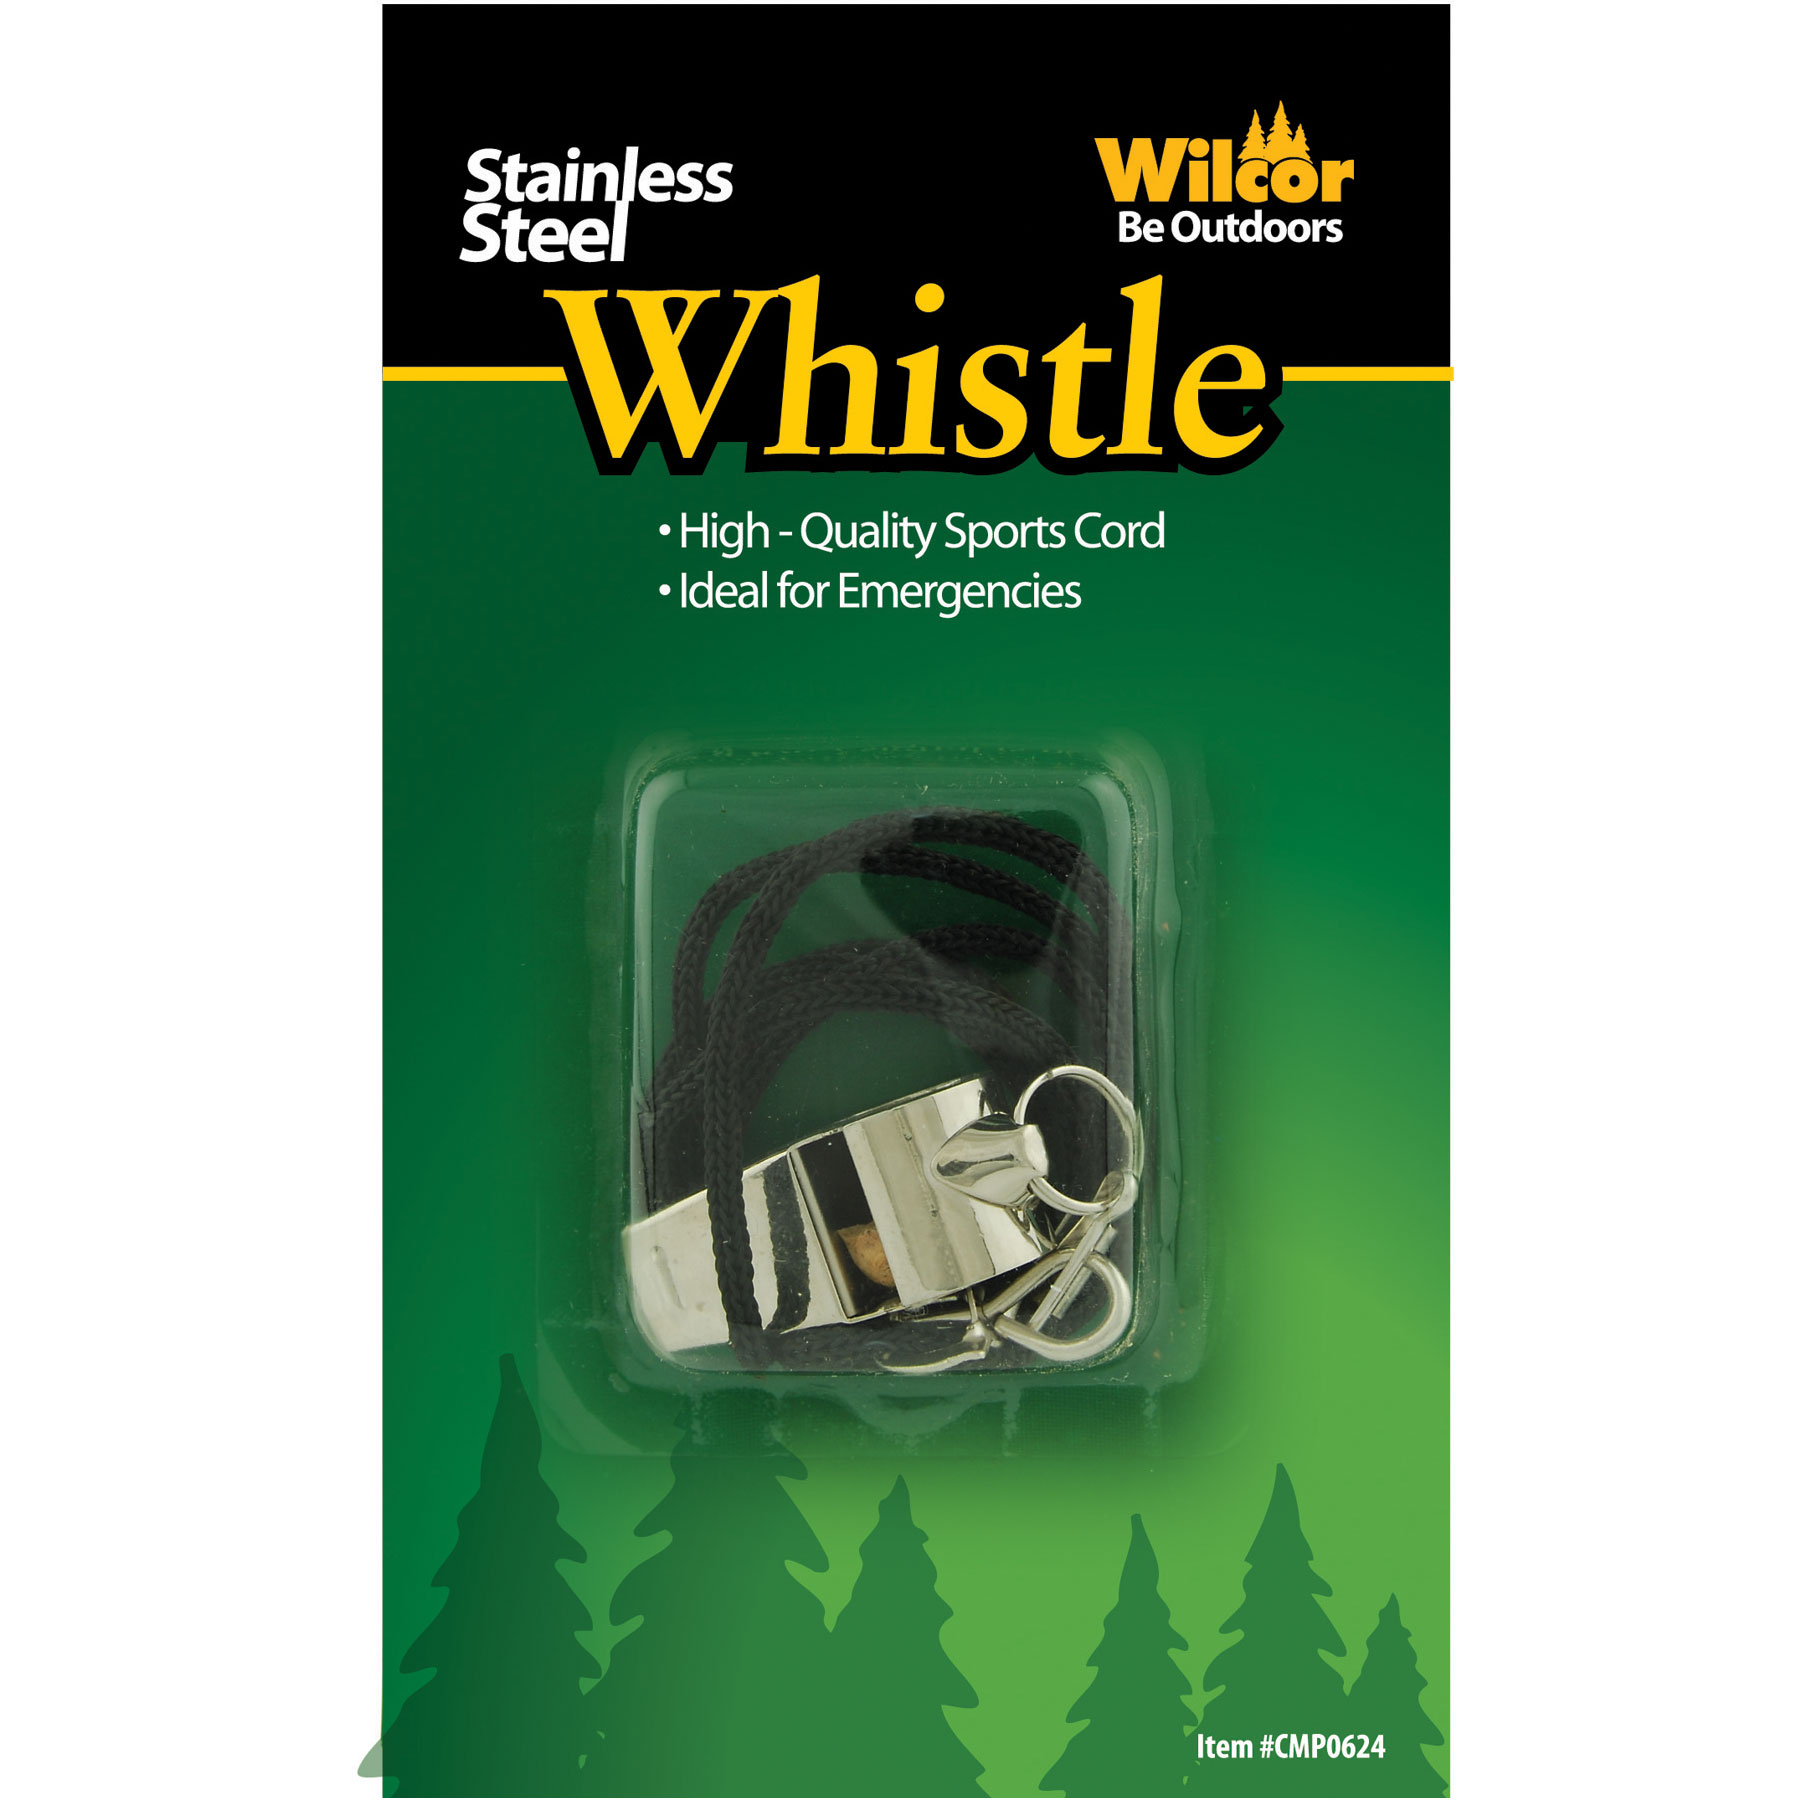 STAINLESS STEEL WHISTLE